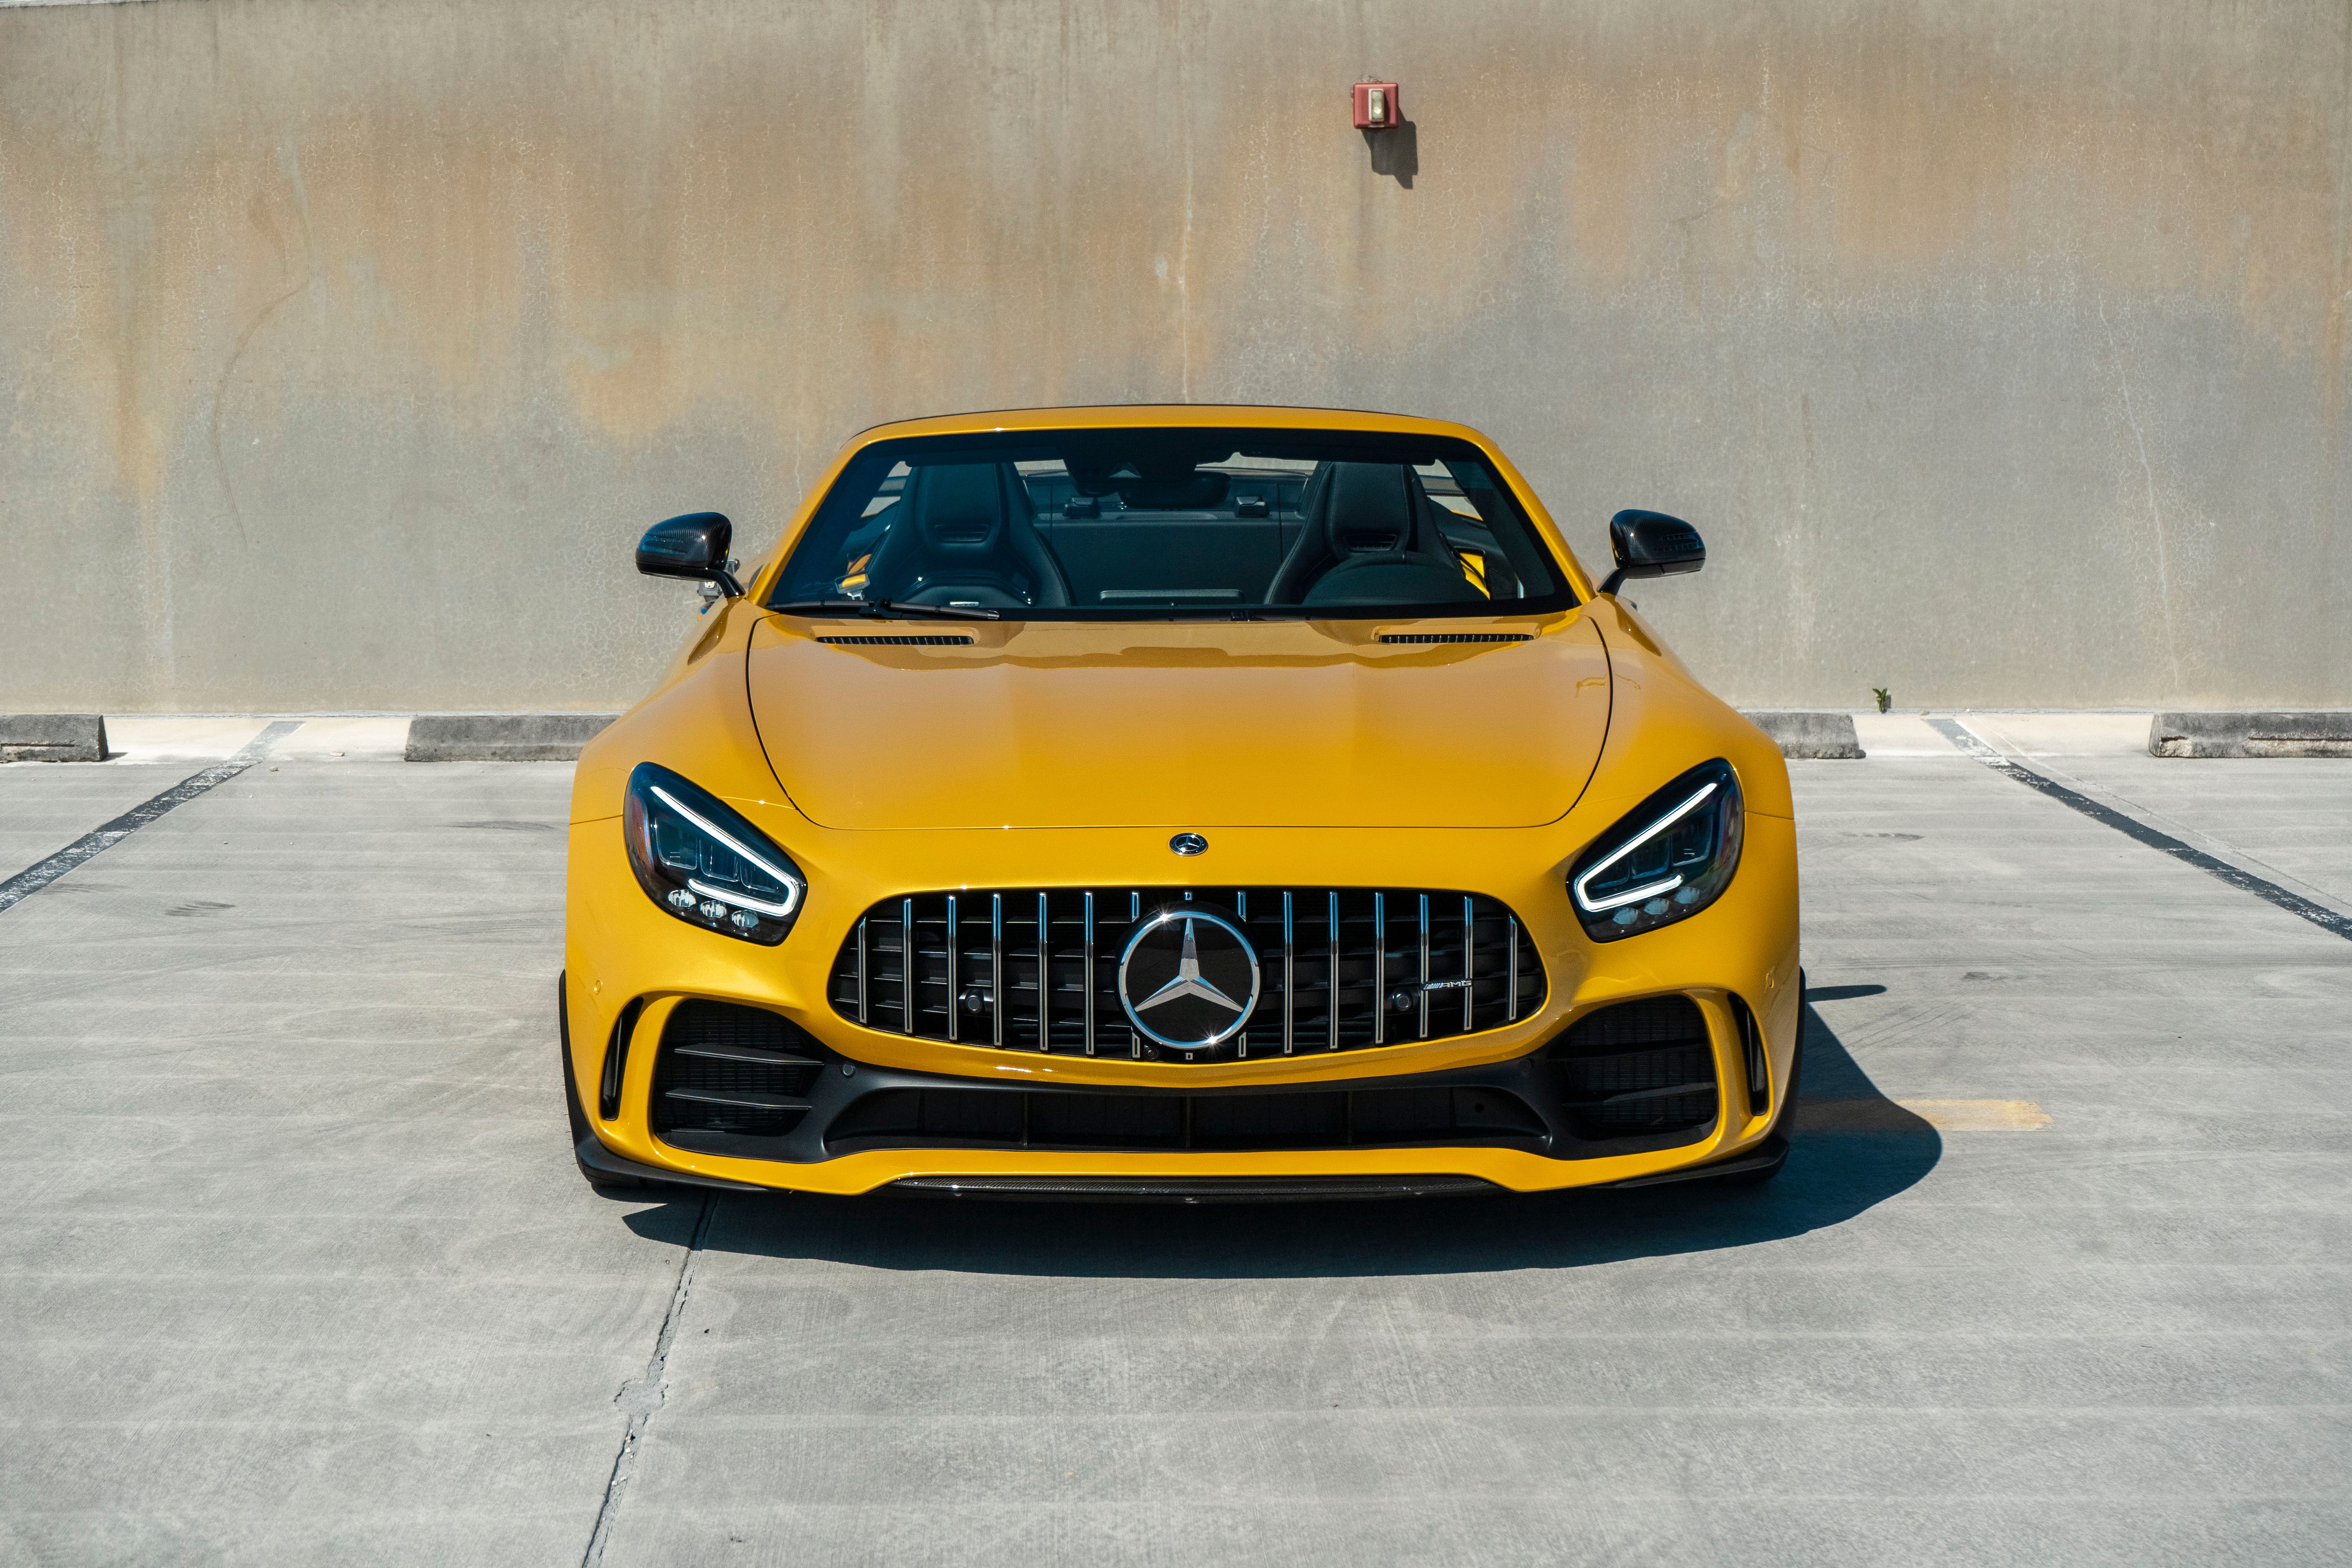 2020 Mercedes-AMG GT R Roadster - Driven Review and Impressions